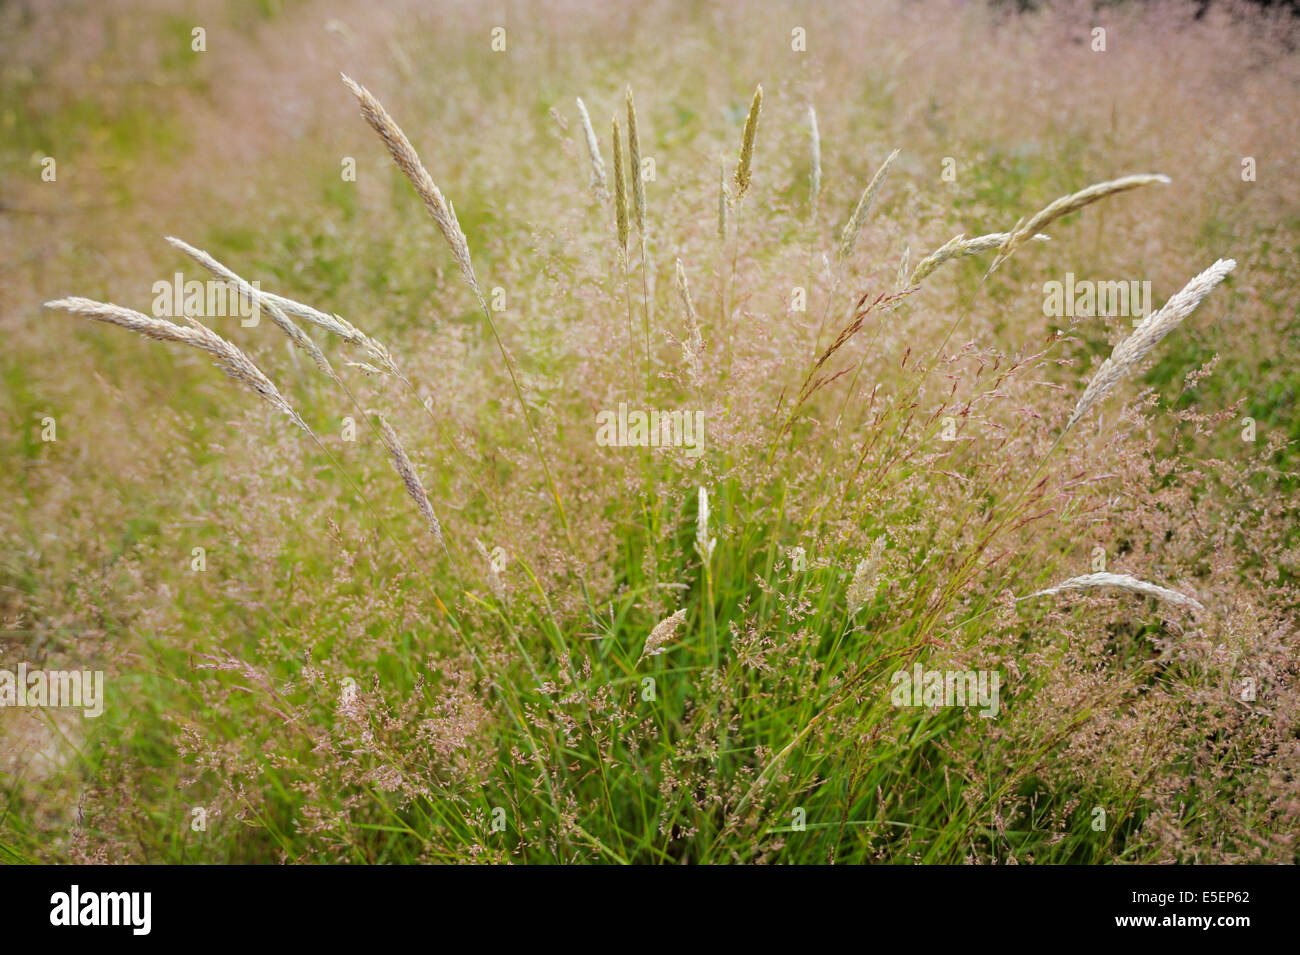 Agrostis capillaris or tenuis, Common Bent, Colonial bent or  Browntop grass with Yorkshire Fog, Holcus lanatus, Wales, UK Stock Photo